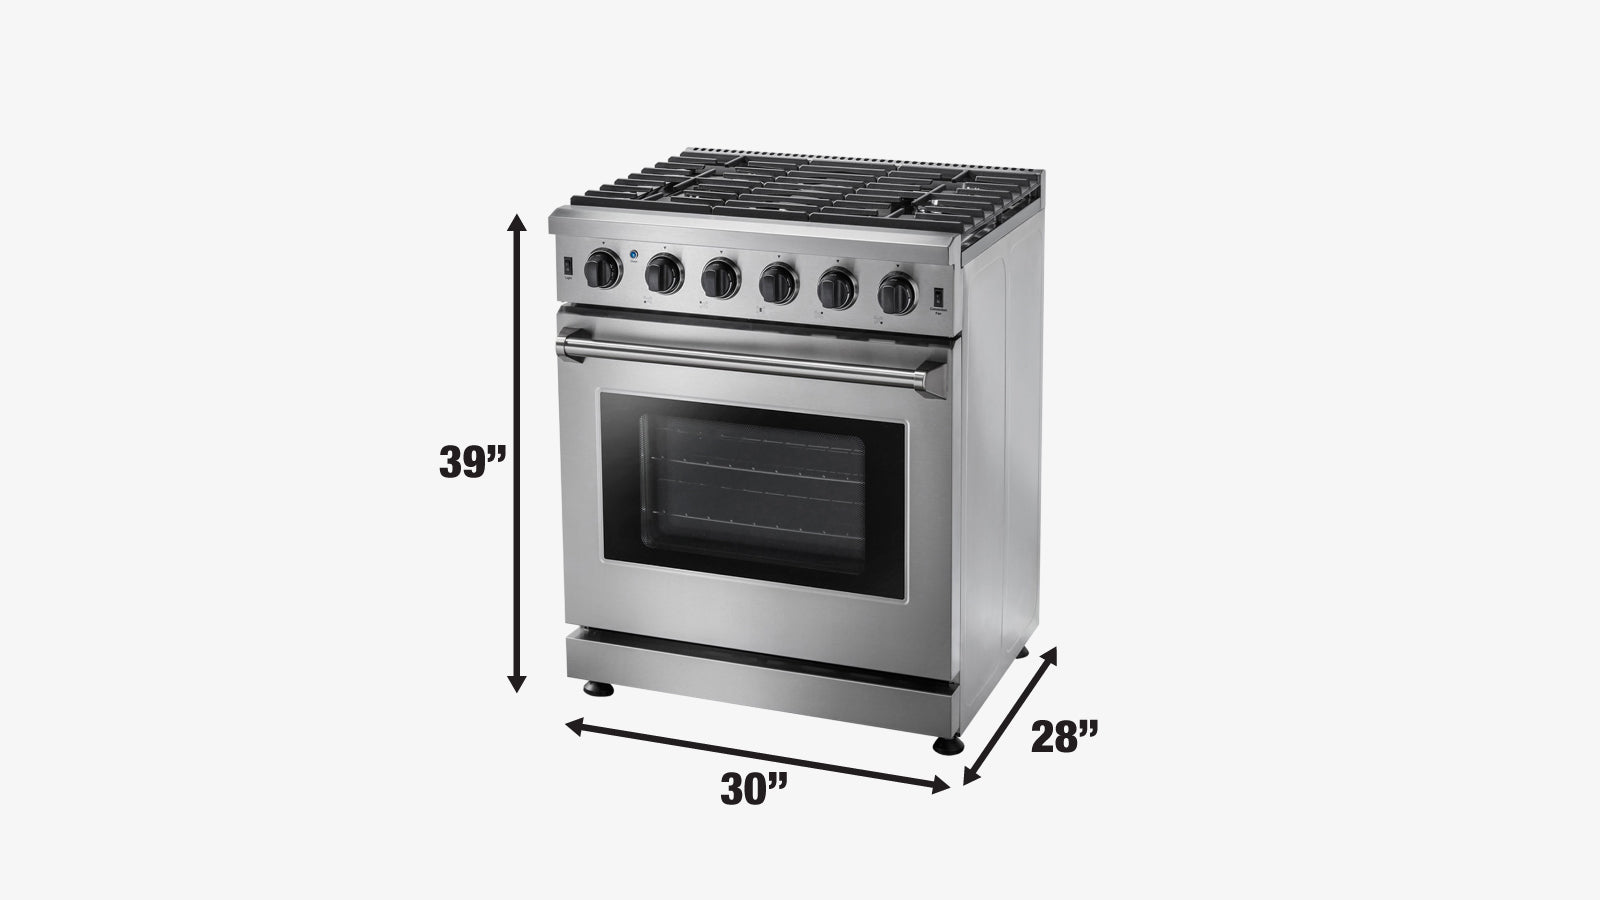 TMG Living Kitchen 30” Freestanding Gas Convection Range, Commercial Convection Fan, 3-Layered Glass Window, 4000-18500 BTU, TMG-HRG30-specifications-image